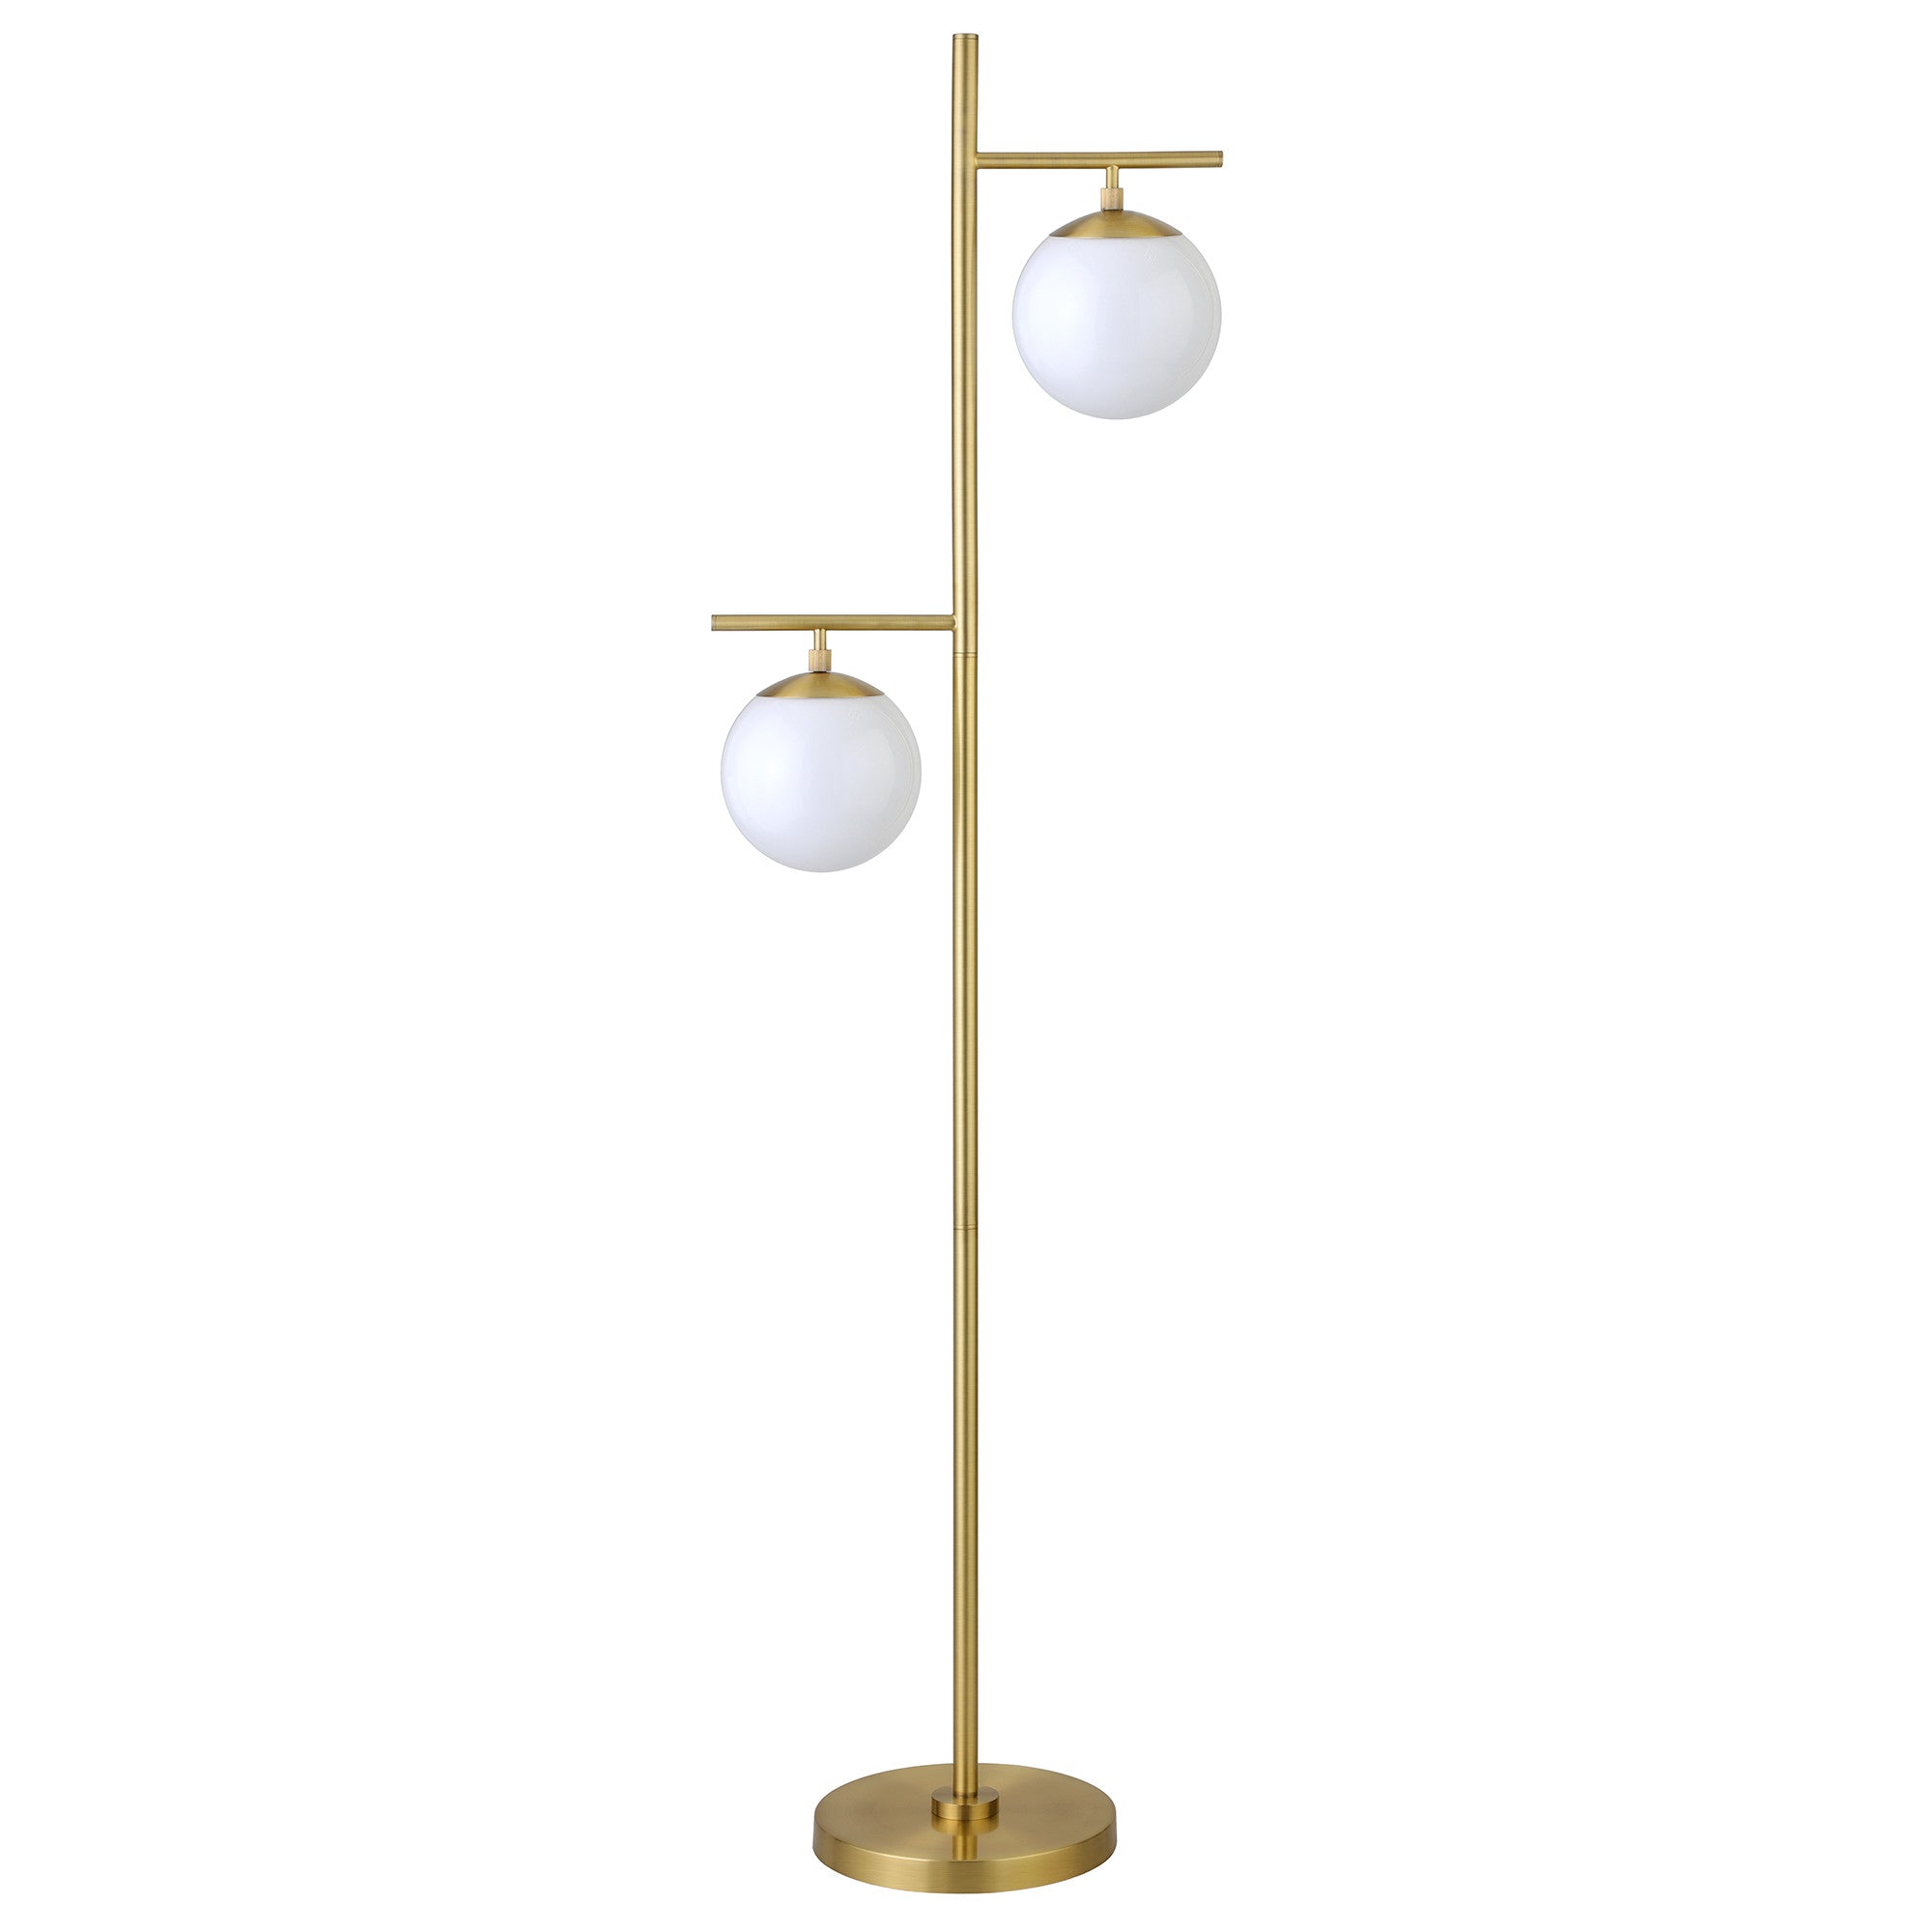 71" Brass Two Light Tree Floor Lamp With White Frosted Glass Globe Shade